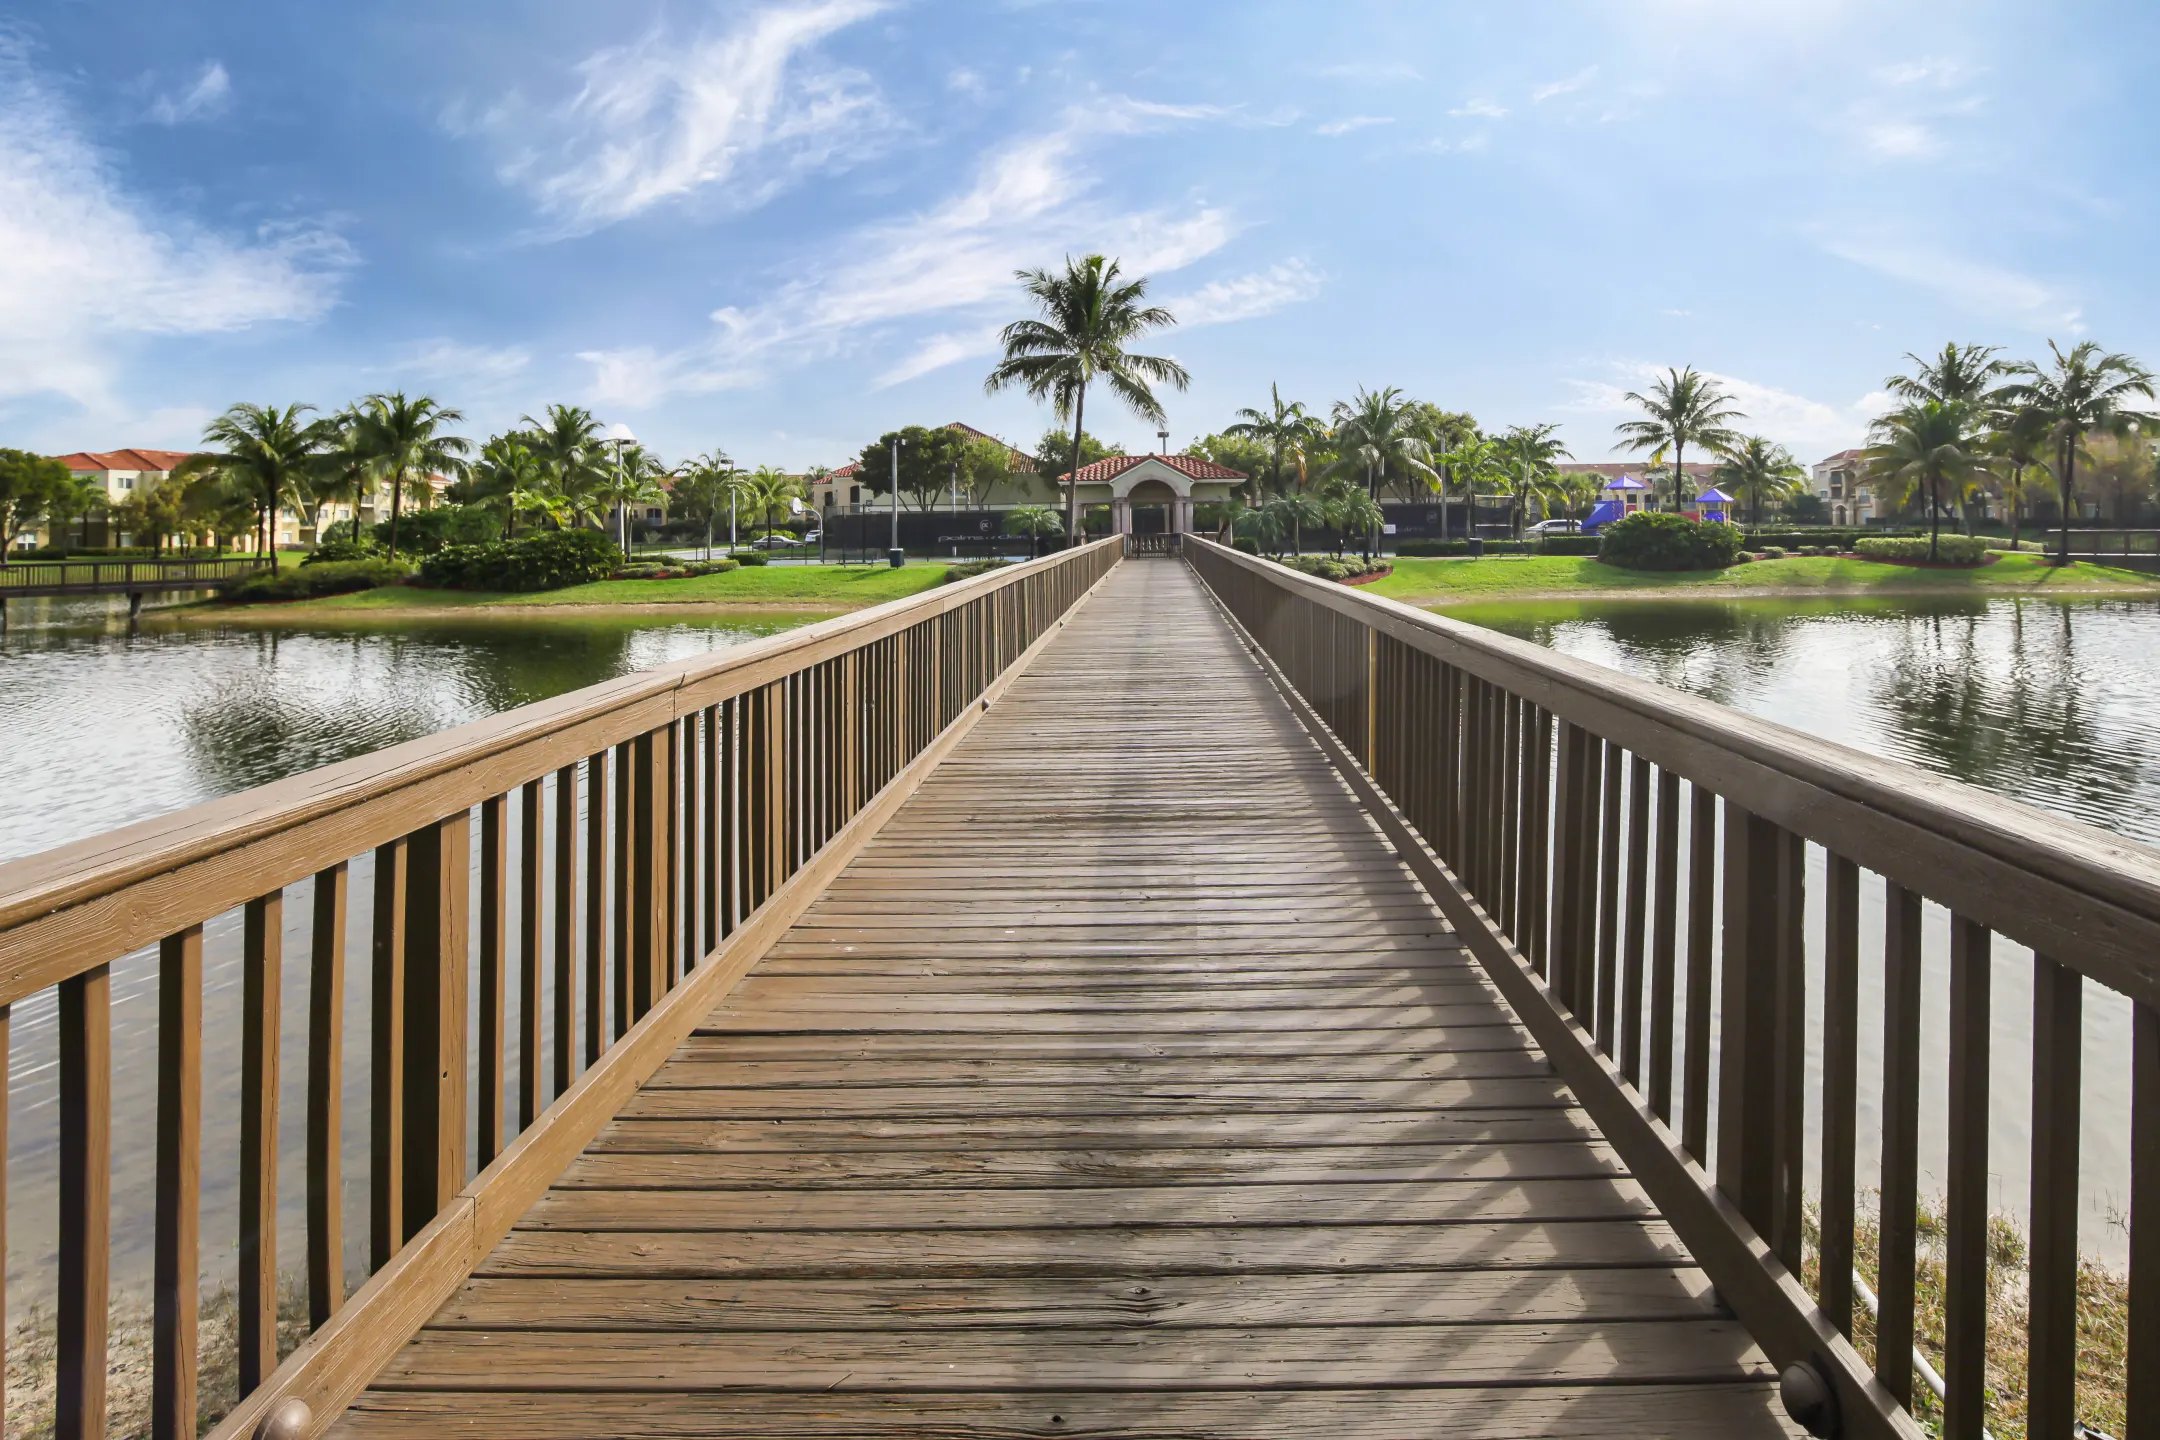 The Palms of Doral Apartments - Doral, FL